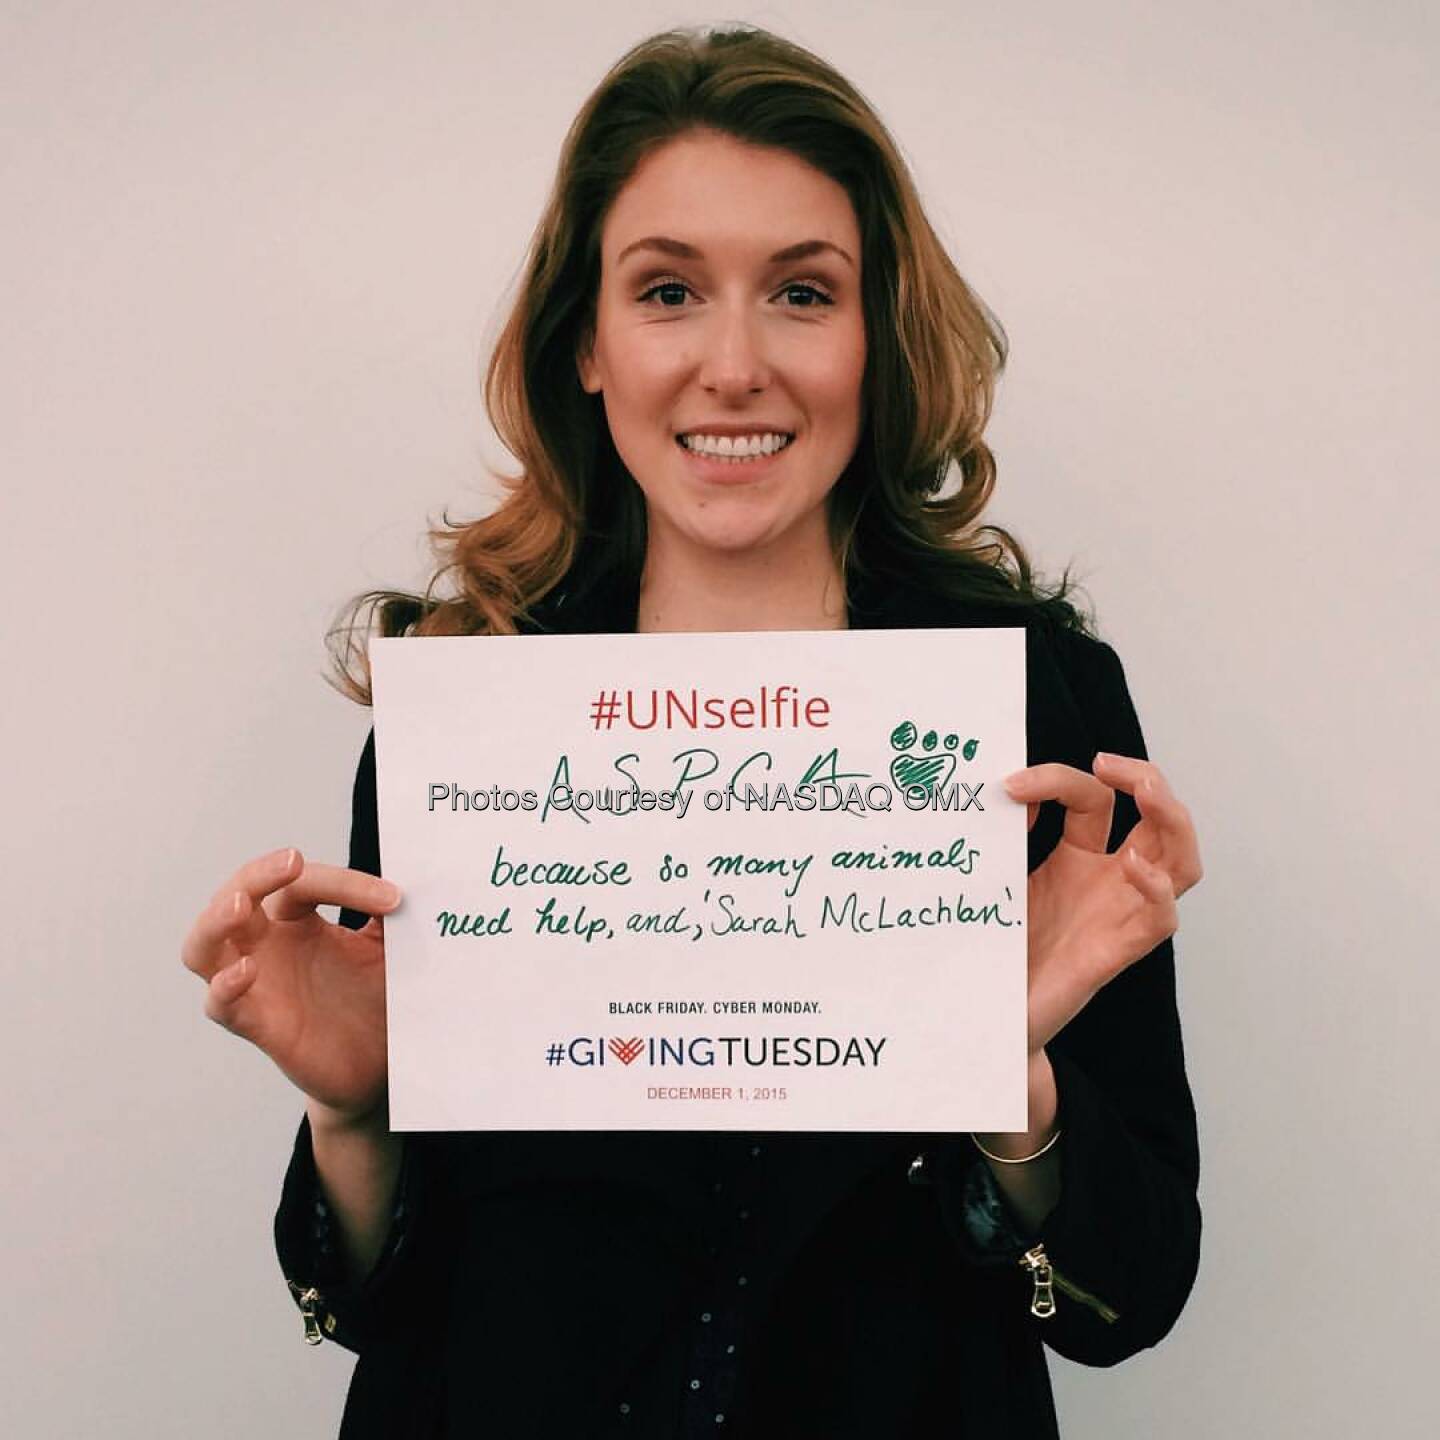 Are you ready for @givingtuesday tomorrow? Join us along with @blackbaud, @microsoft @92ndstreety and the @unitednations by sending us your #UNselfie to be featured on the #Nasdaq Tower tomorrow morning like @megmodic just did for the @ASPCA    Source: http://facebook.com/NASDAQ